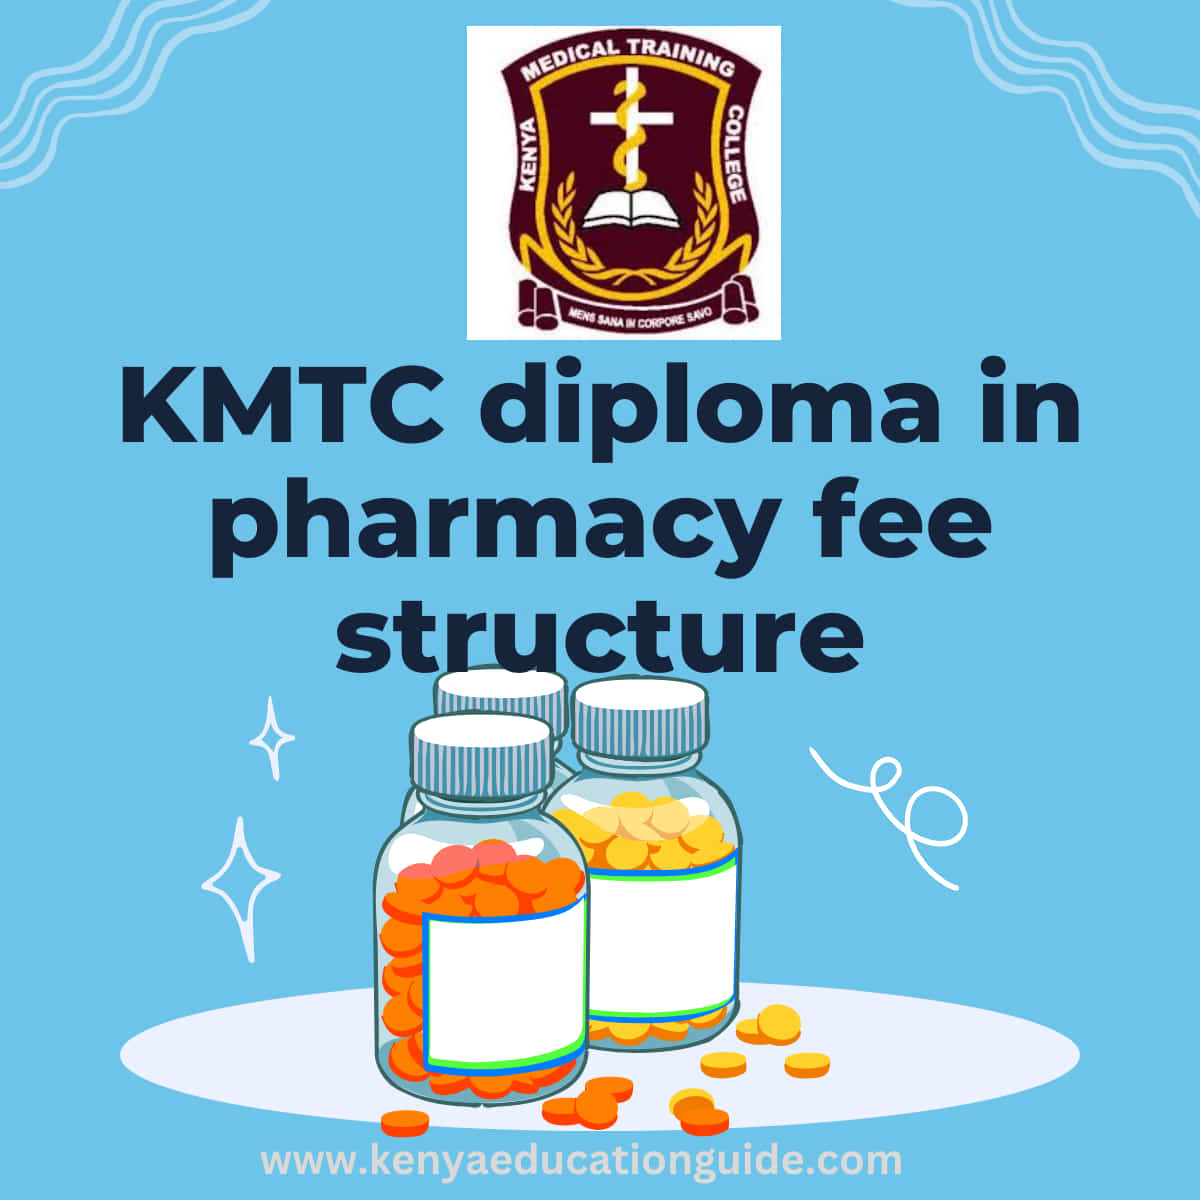 KMTC diploma in pharmacy fee structure